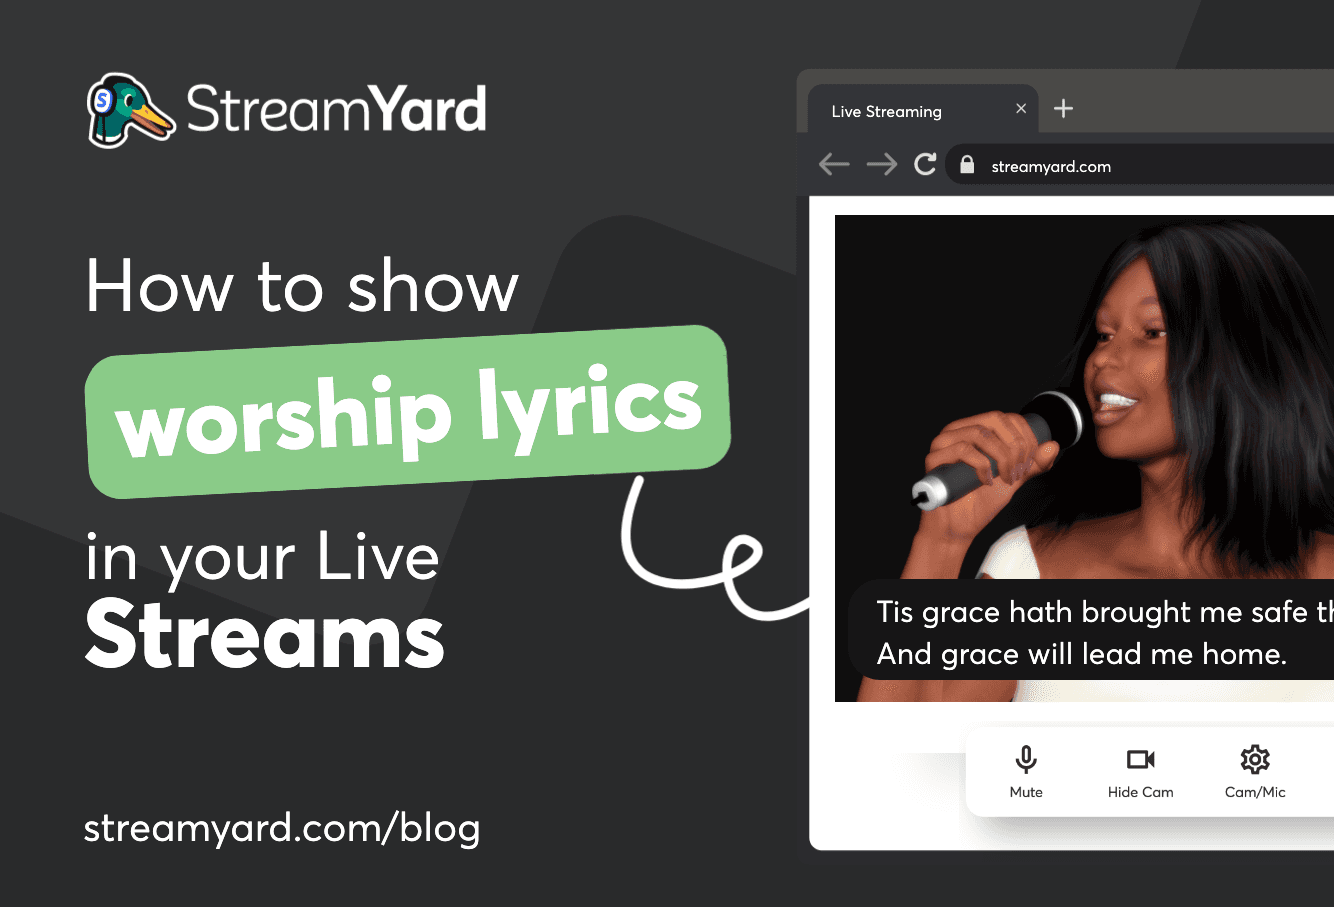 Learn how to show lyrics on live streams for faith-based broadcasts to maximize the reach of your church services with StreamYard.